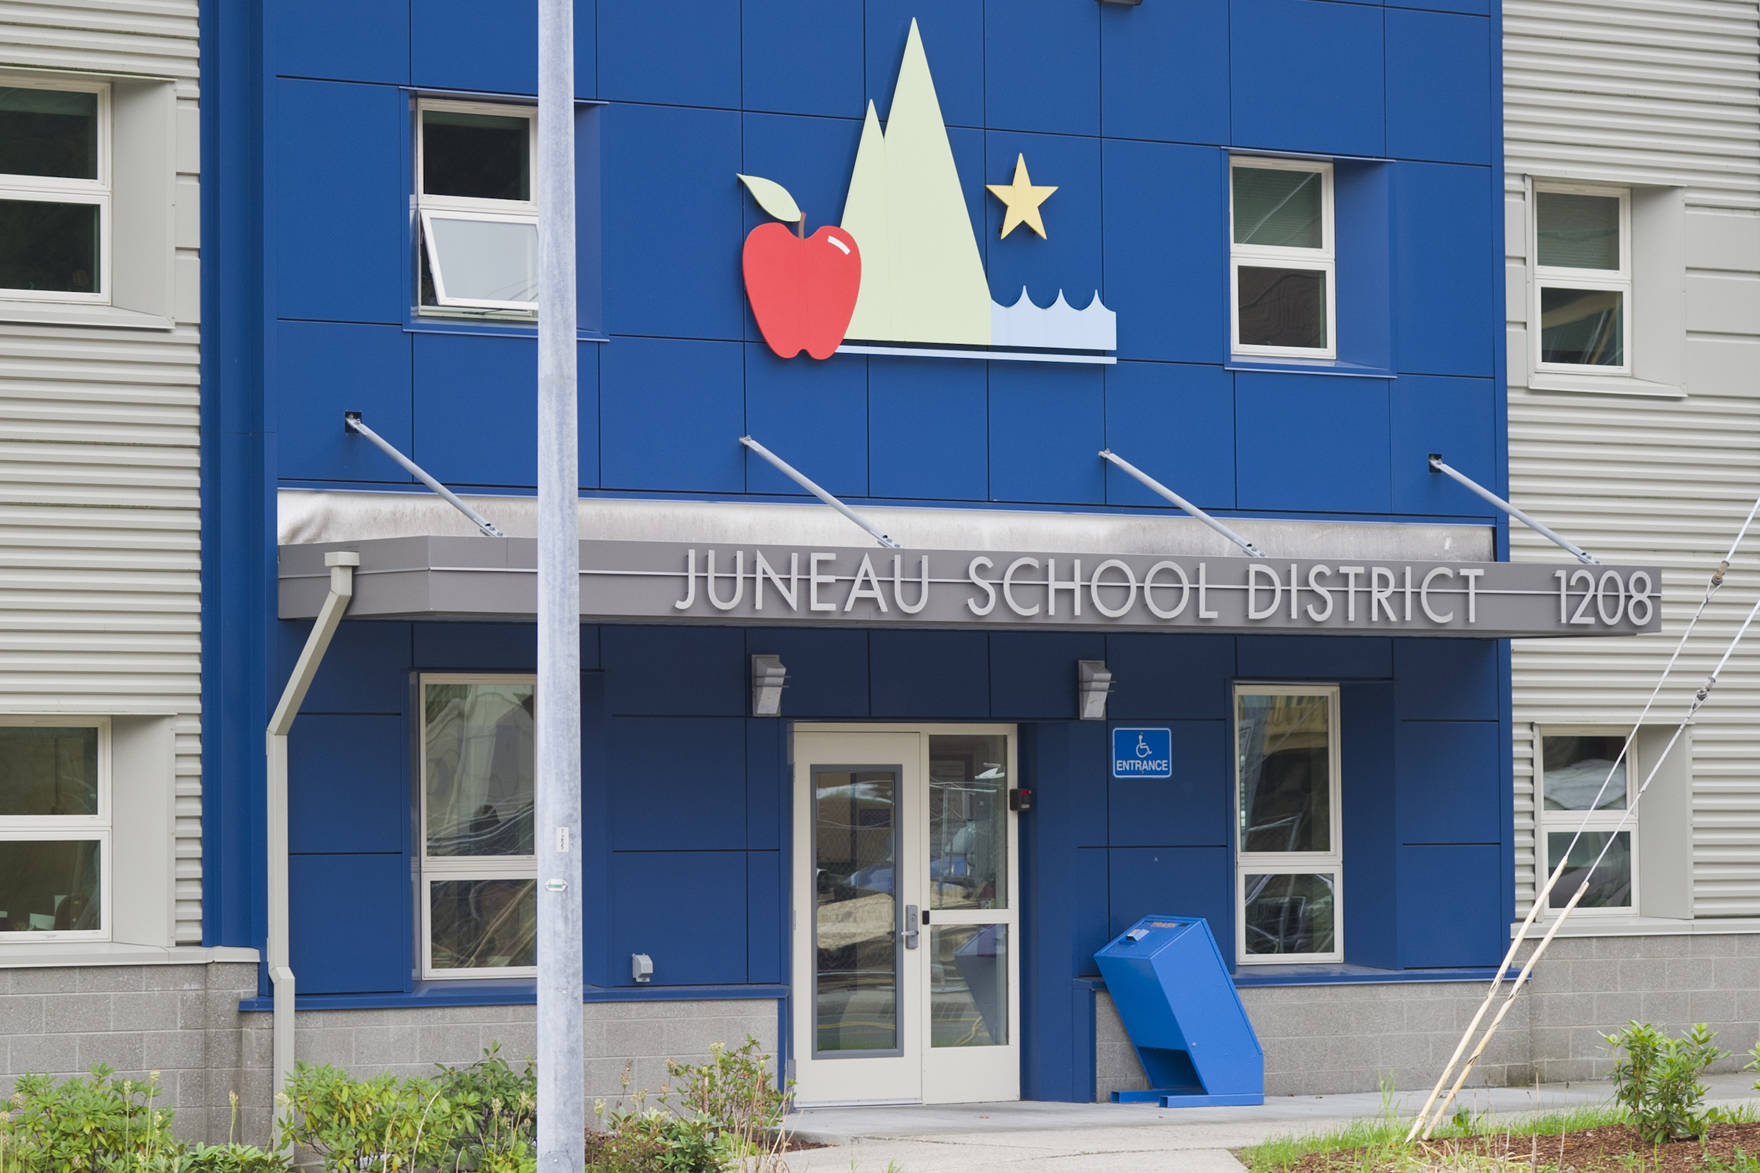 The Juneau School District’s adminstration buidling is at the corner of Glacier Avenue and 12th Street. (Michael Penn | Juneau Empire)